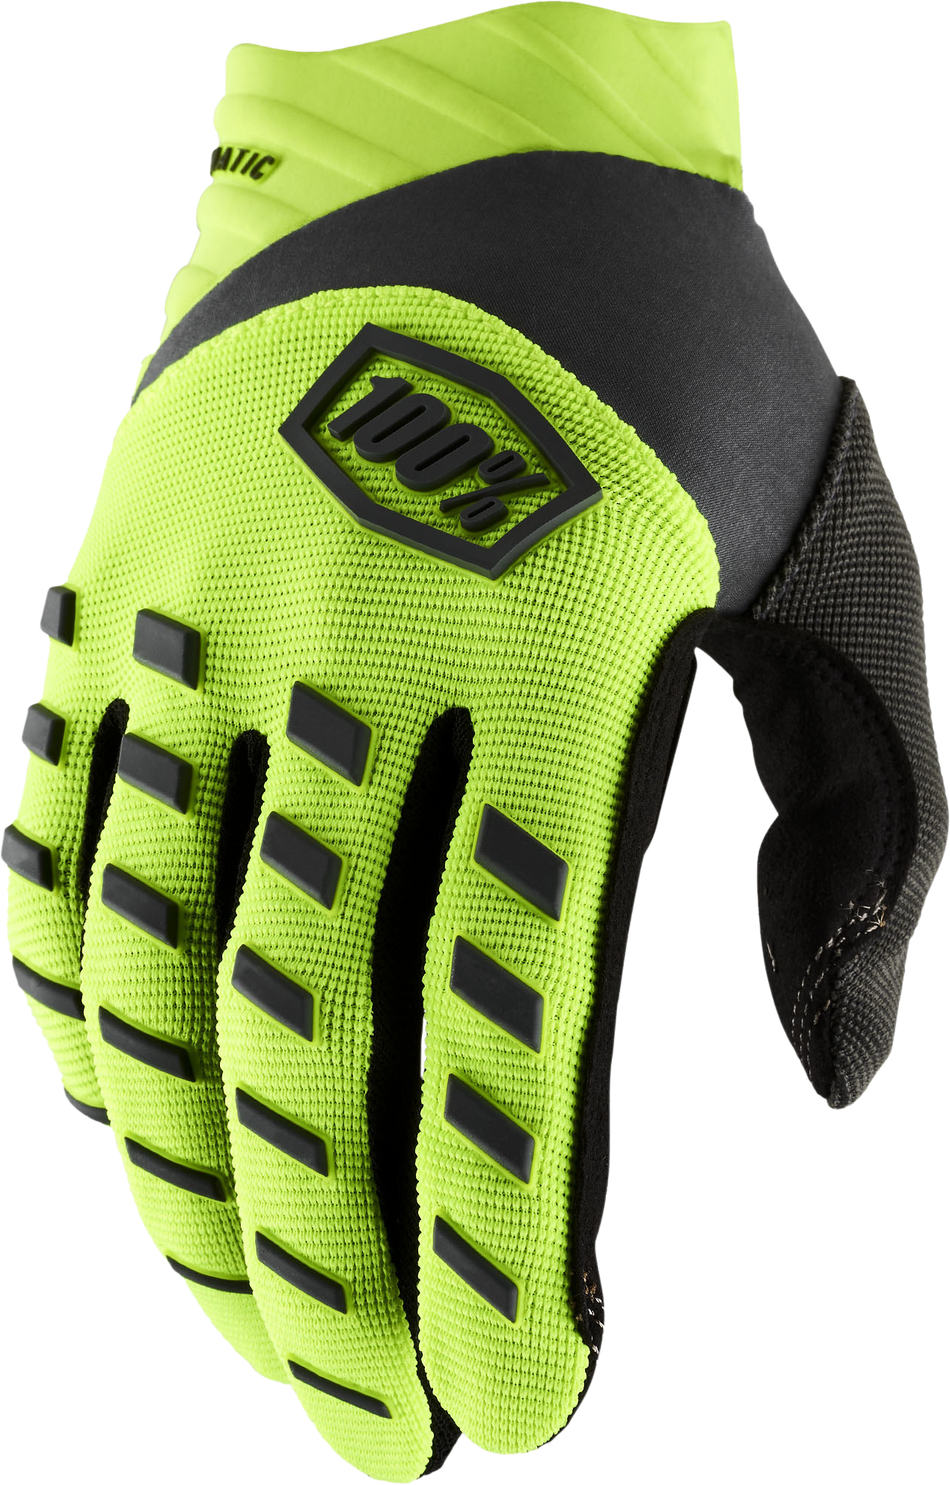 100% Airmatic Gloves Fluo Yellow/Black 2x 10000-00014